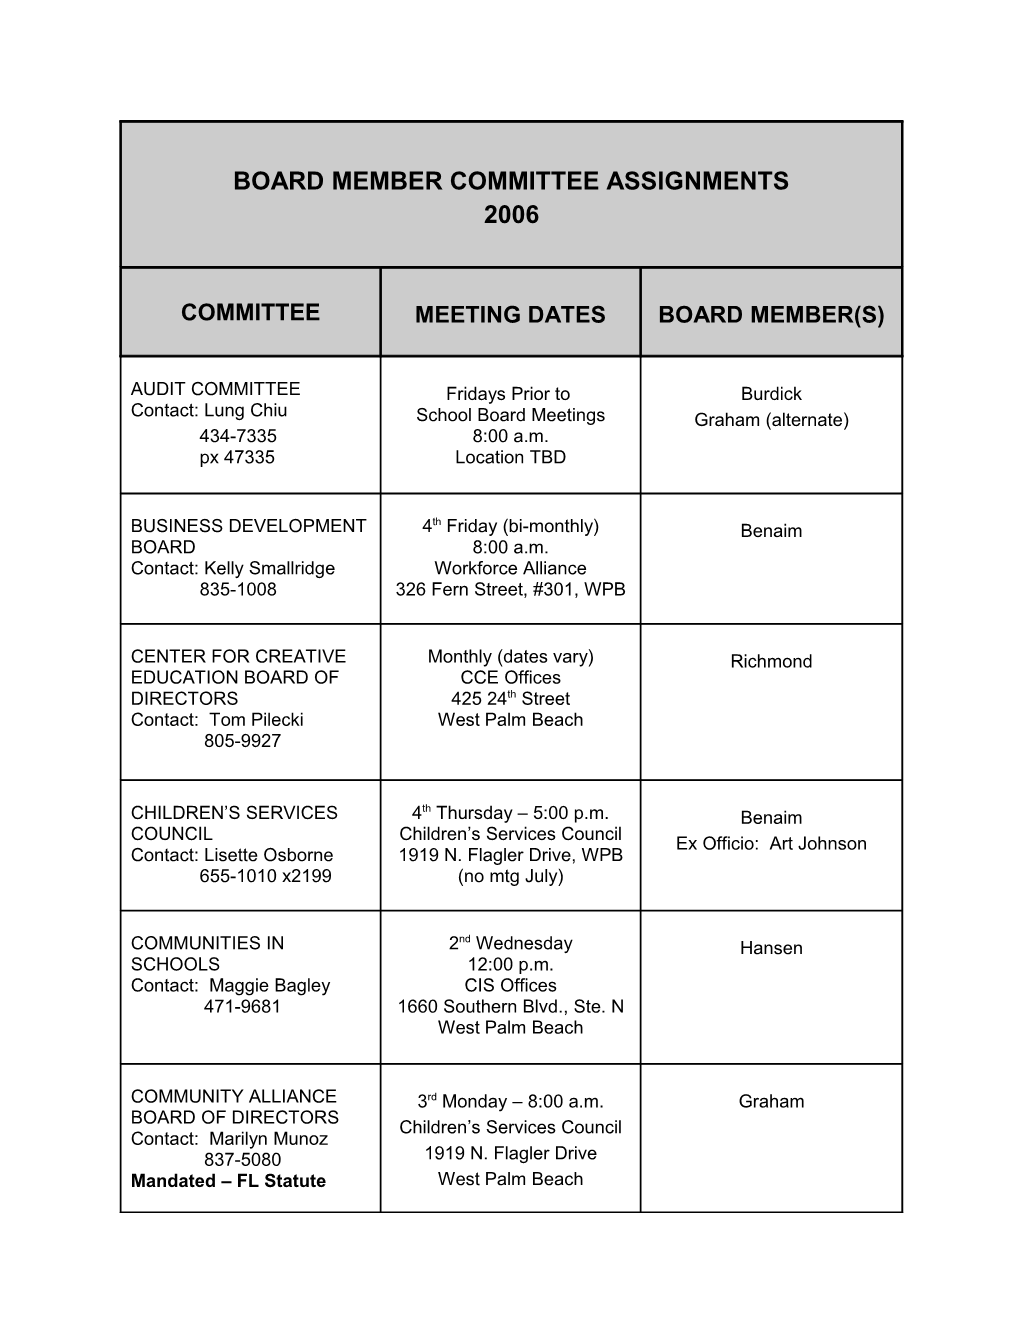 2003 Board Member Committee Assignments